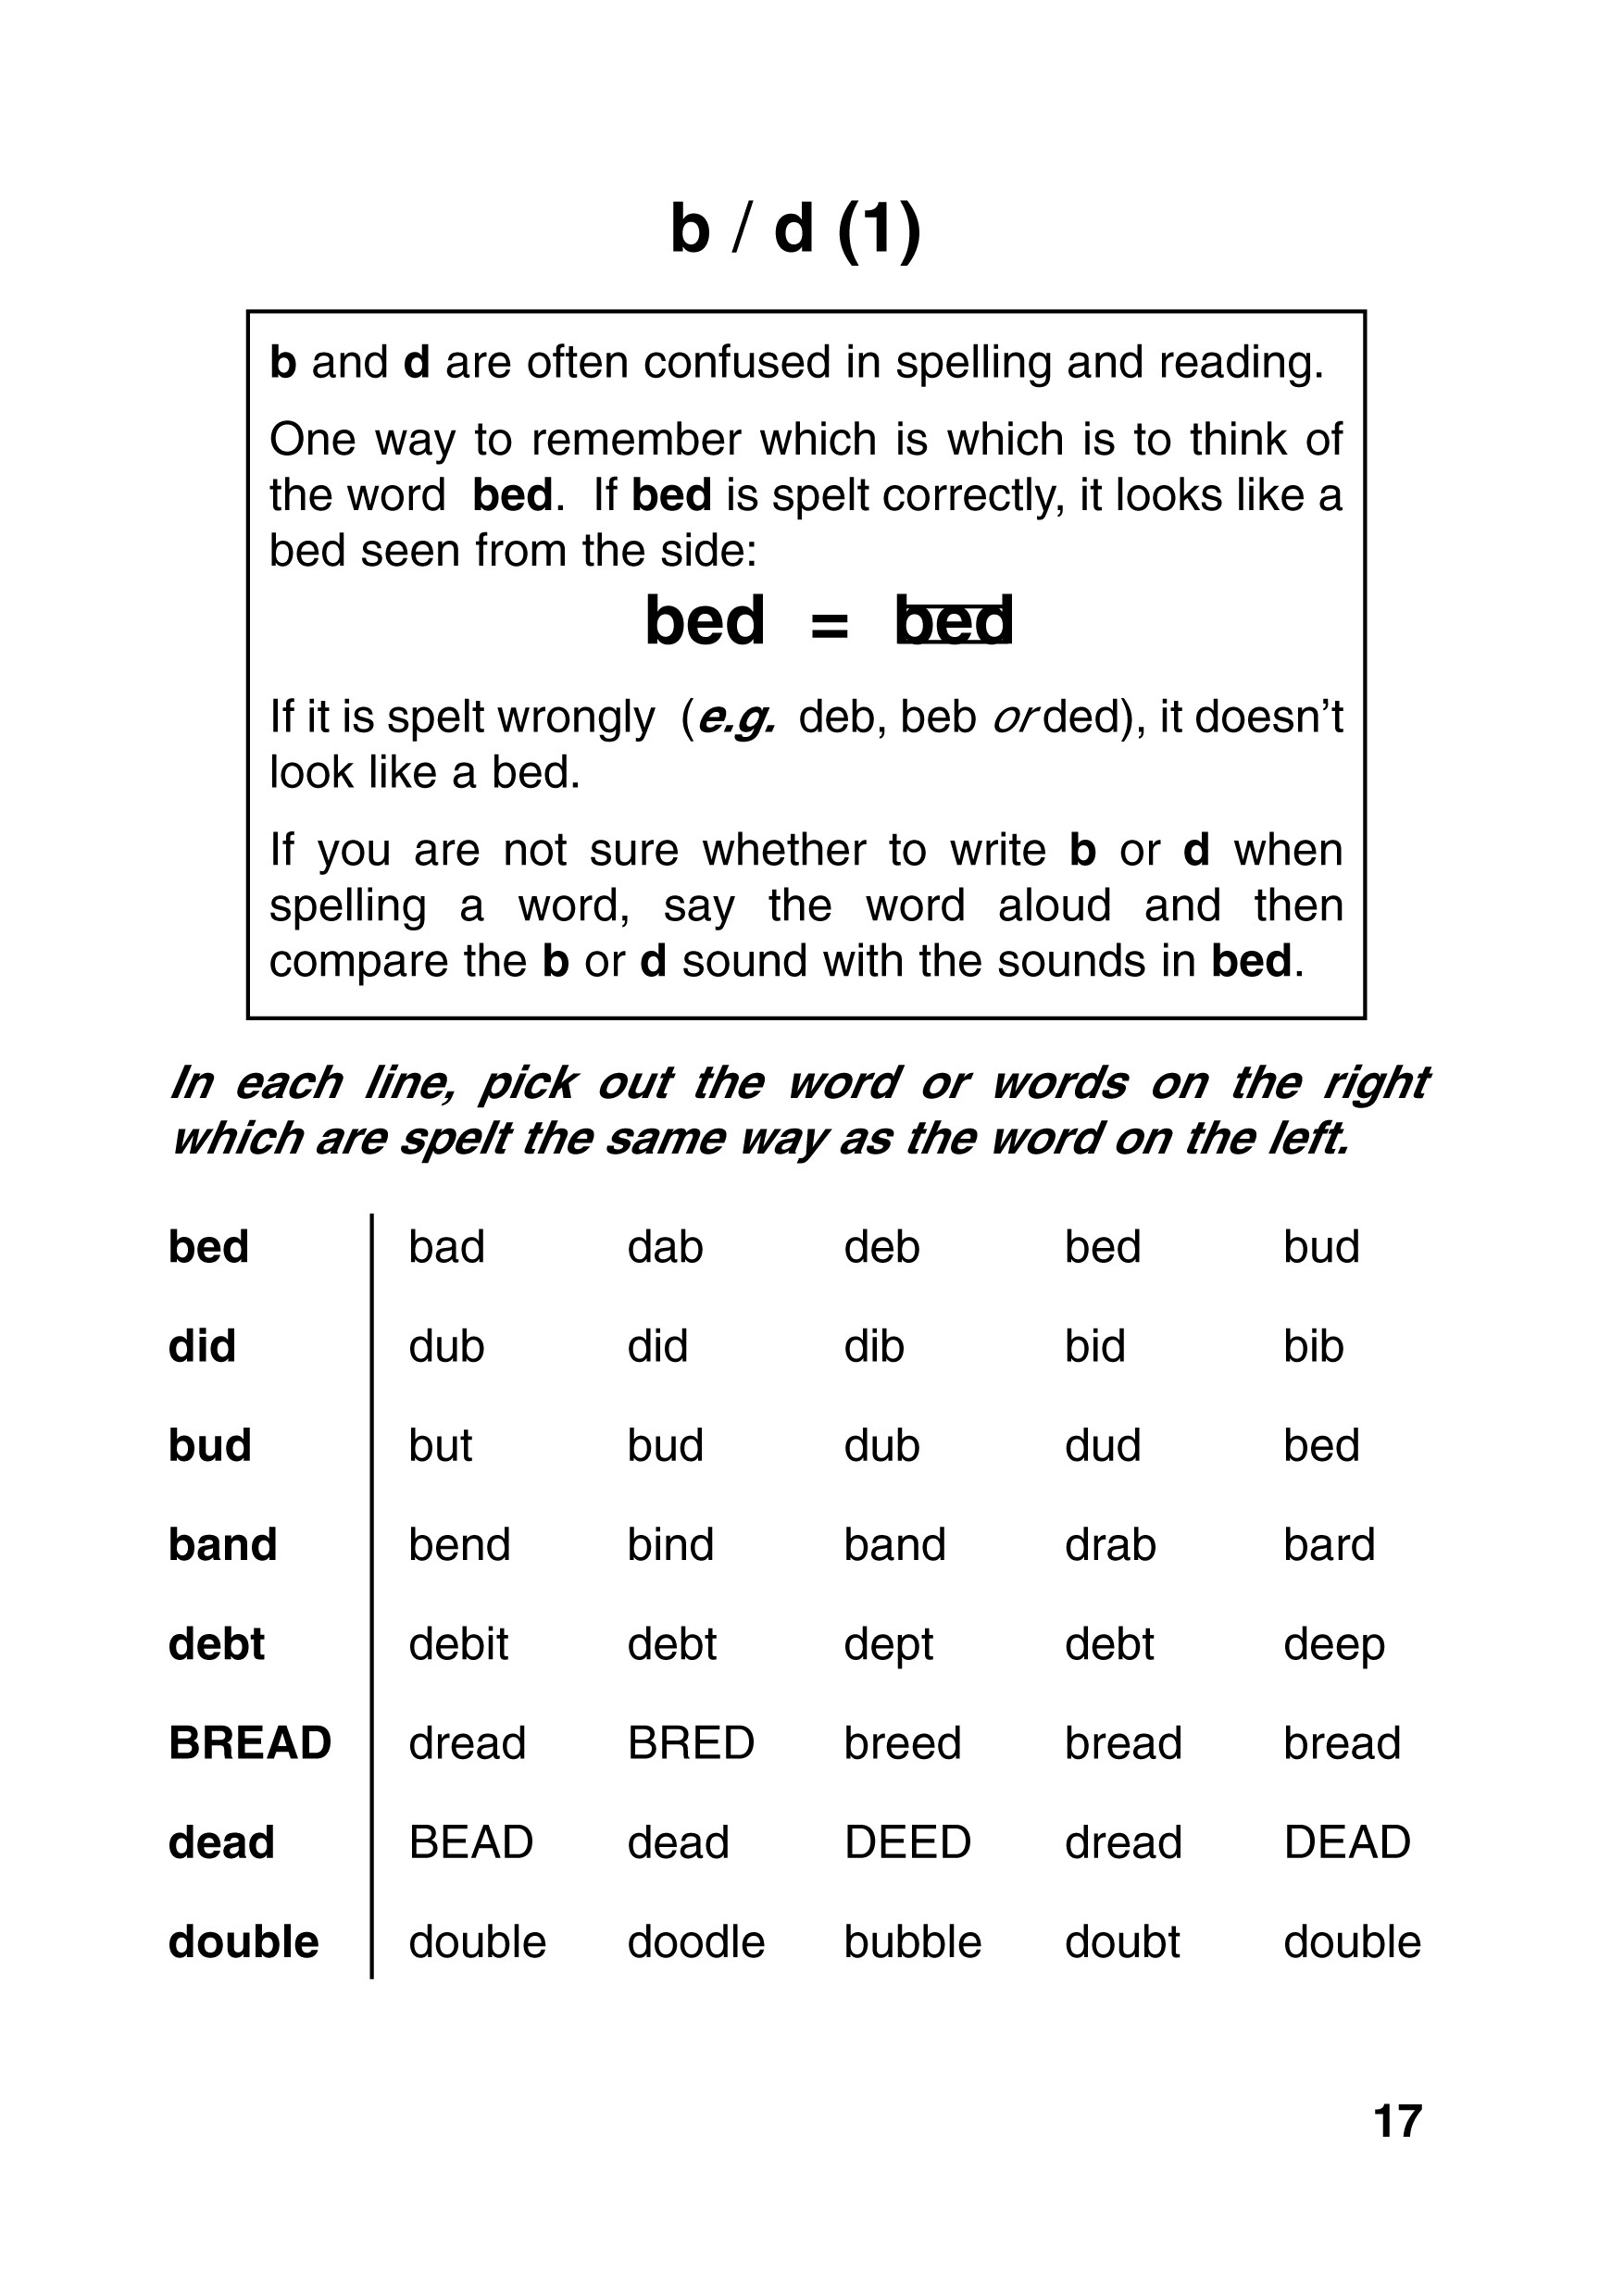 17-best-images-of-adult-literacy-worksheets-for-reading-adult-literacy-worksheets-math